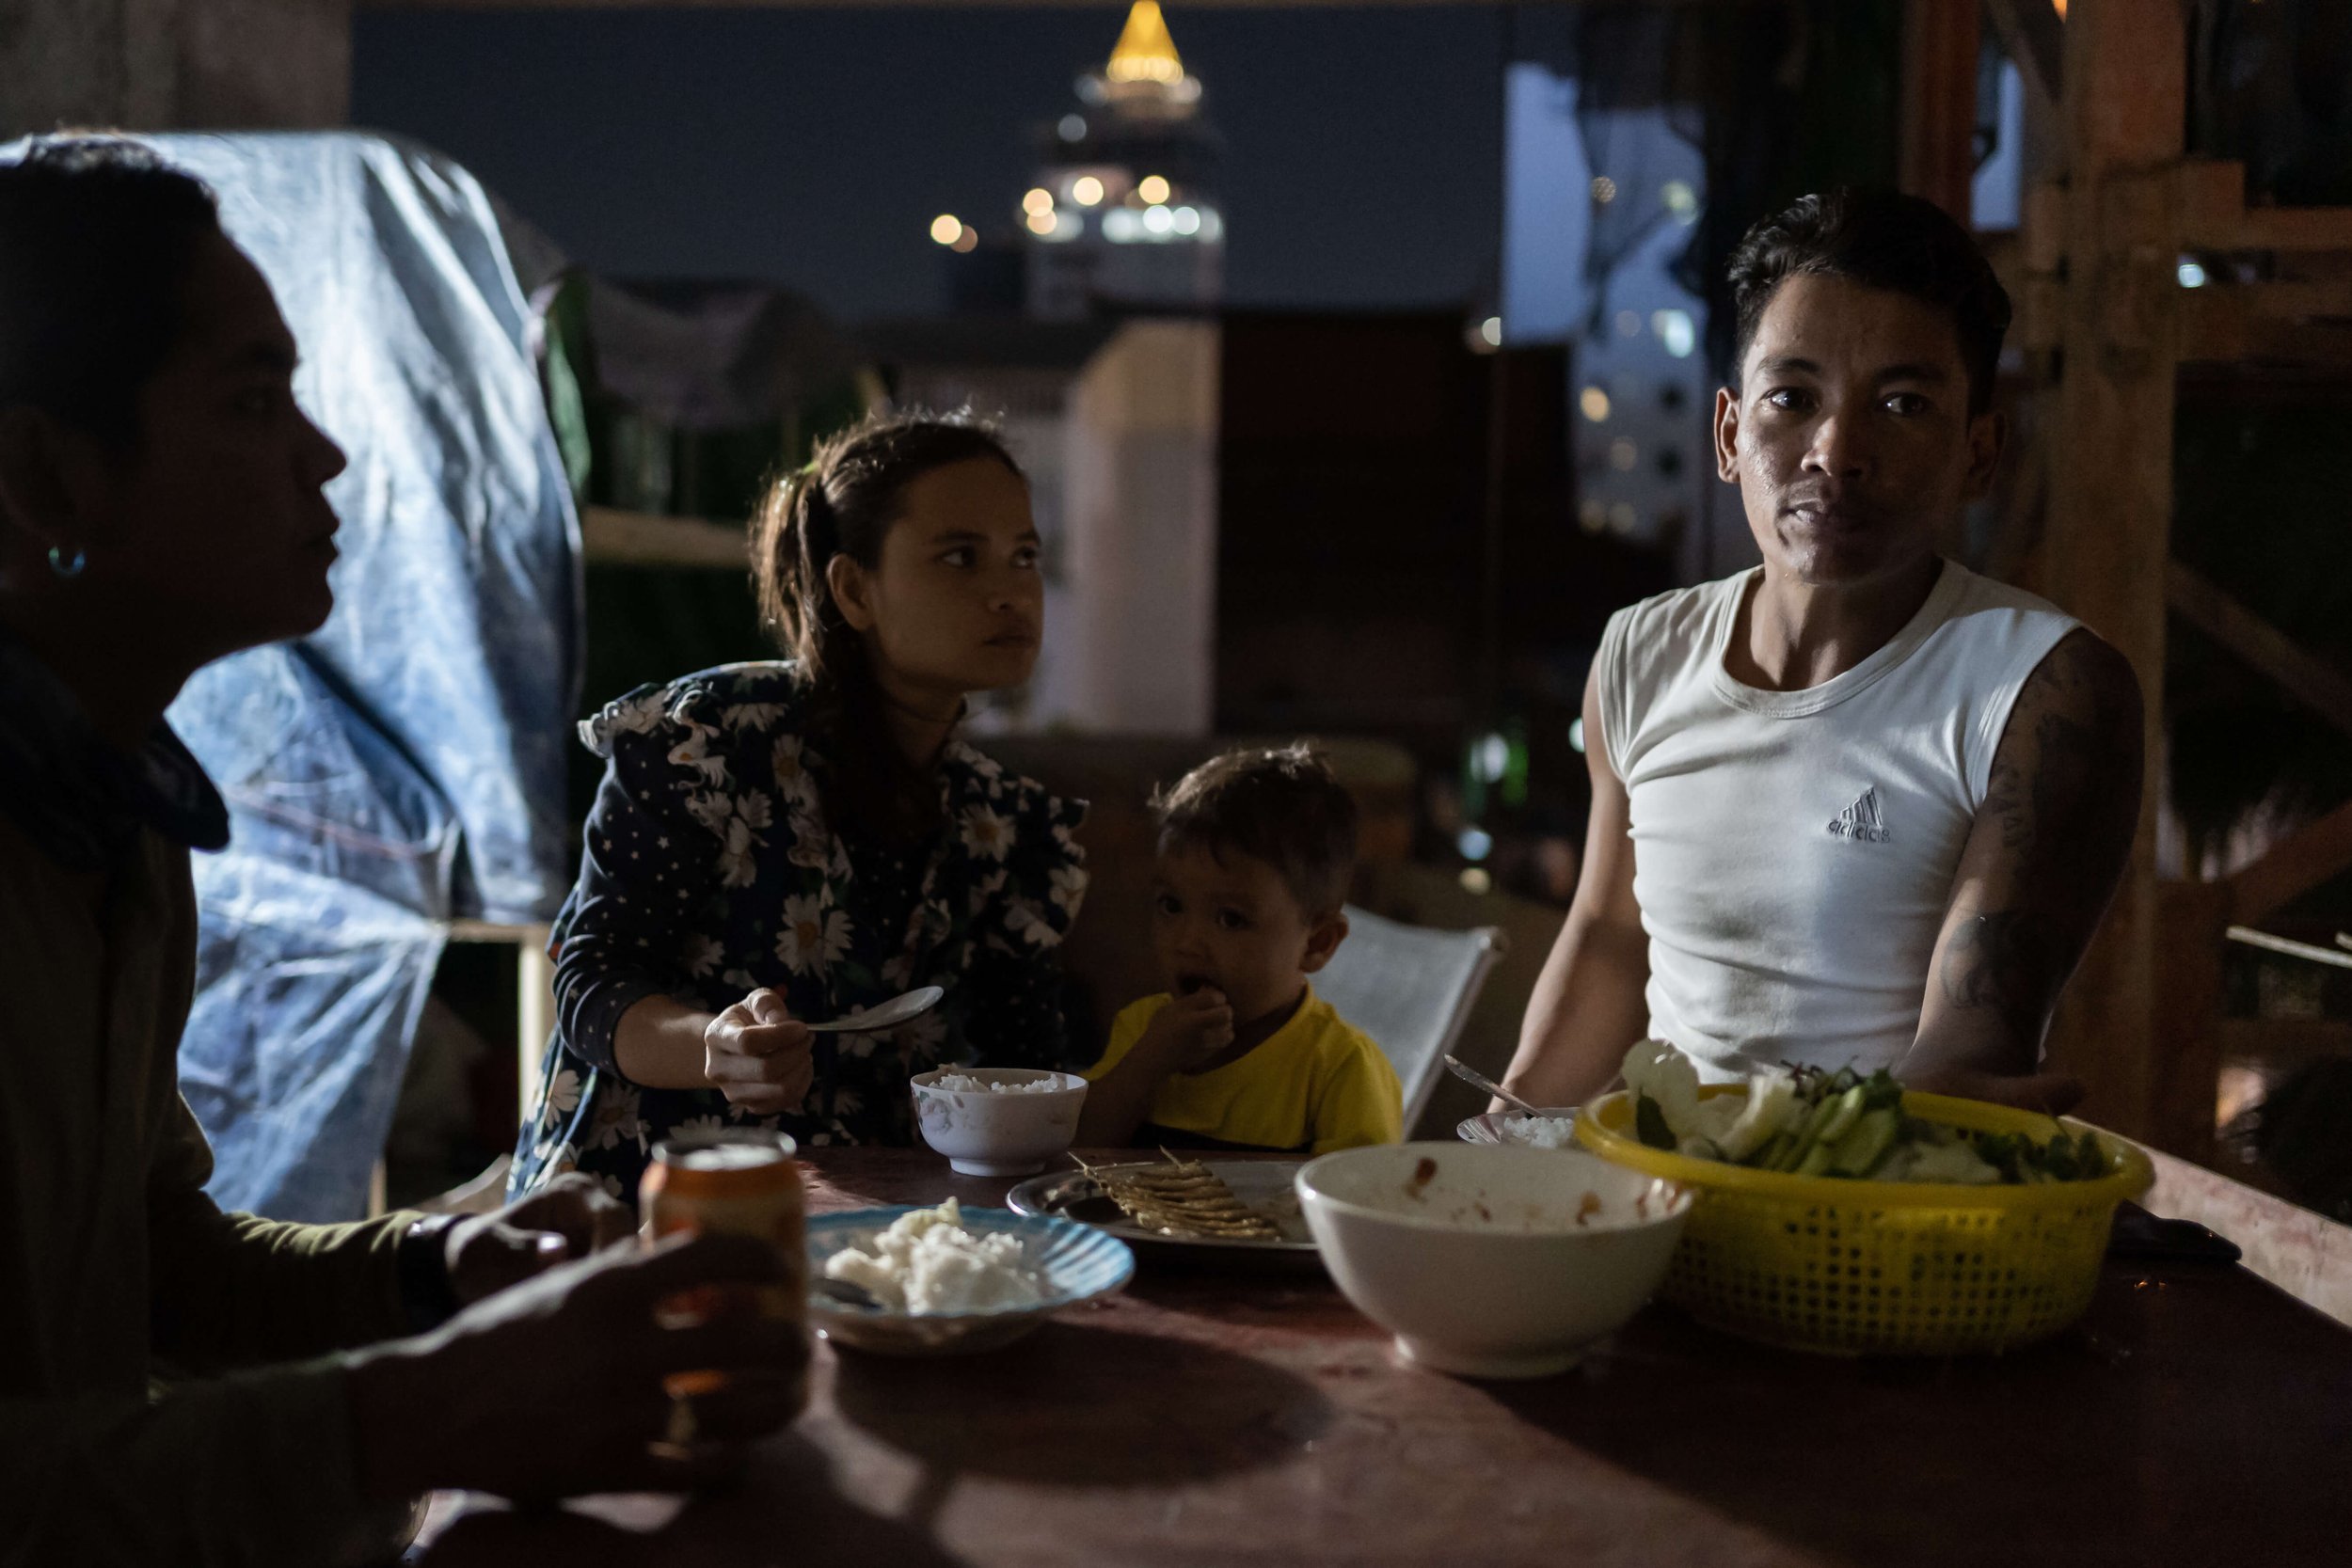  Construction worker Ma Srieng and his wife Som Theary eat dinner on the 3rd floor of a half-built 18th-floor condominium where they live in the heart of Phnom Penh. They live onsite with their 2-year-old son and Srieng’s cousin Dieb Phearum. Like ma